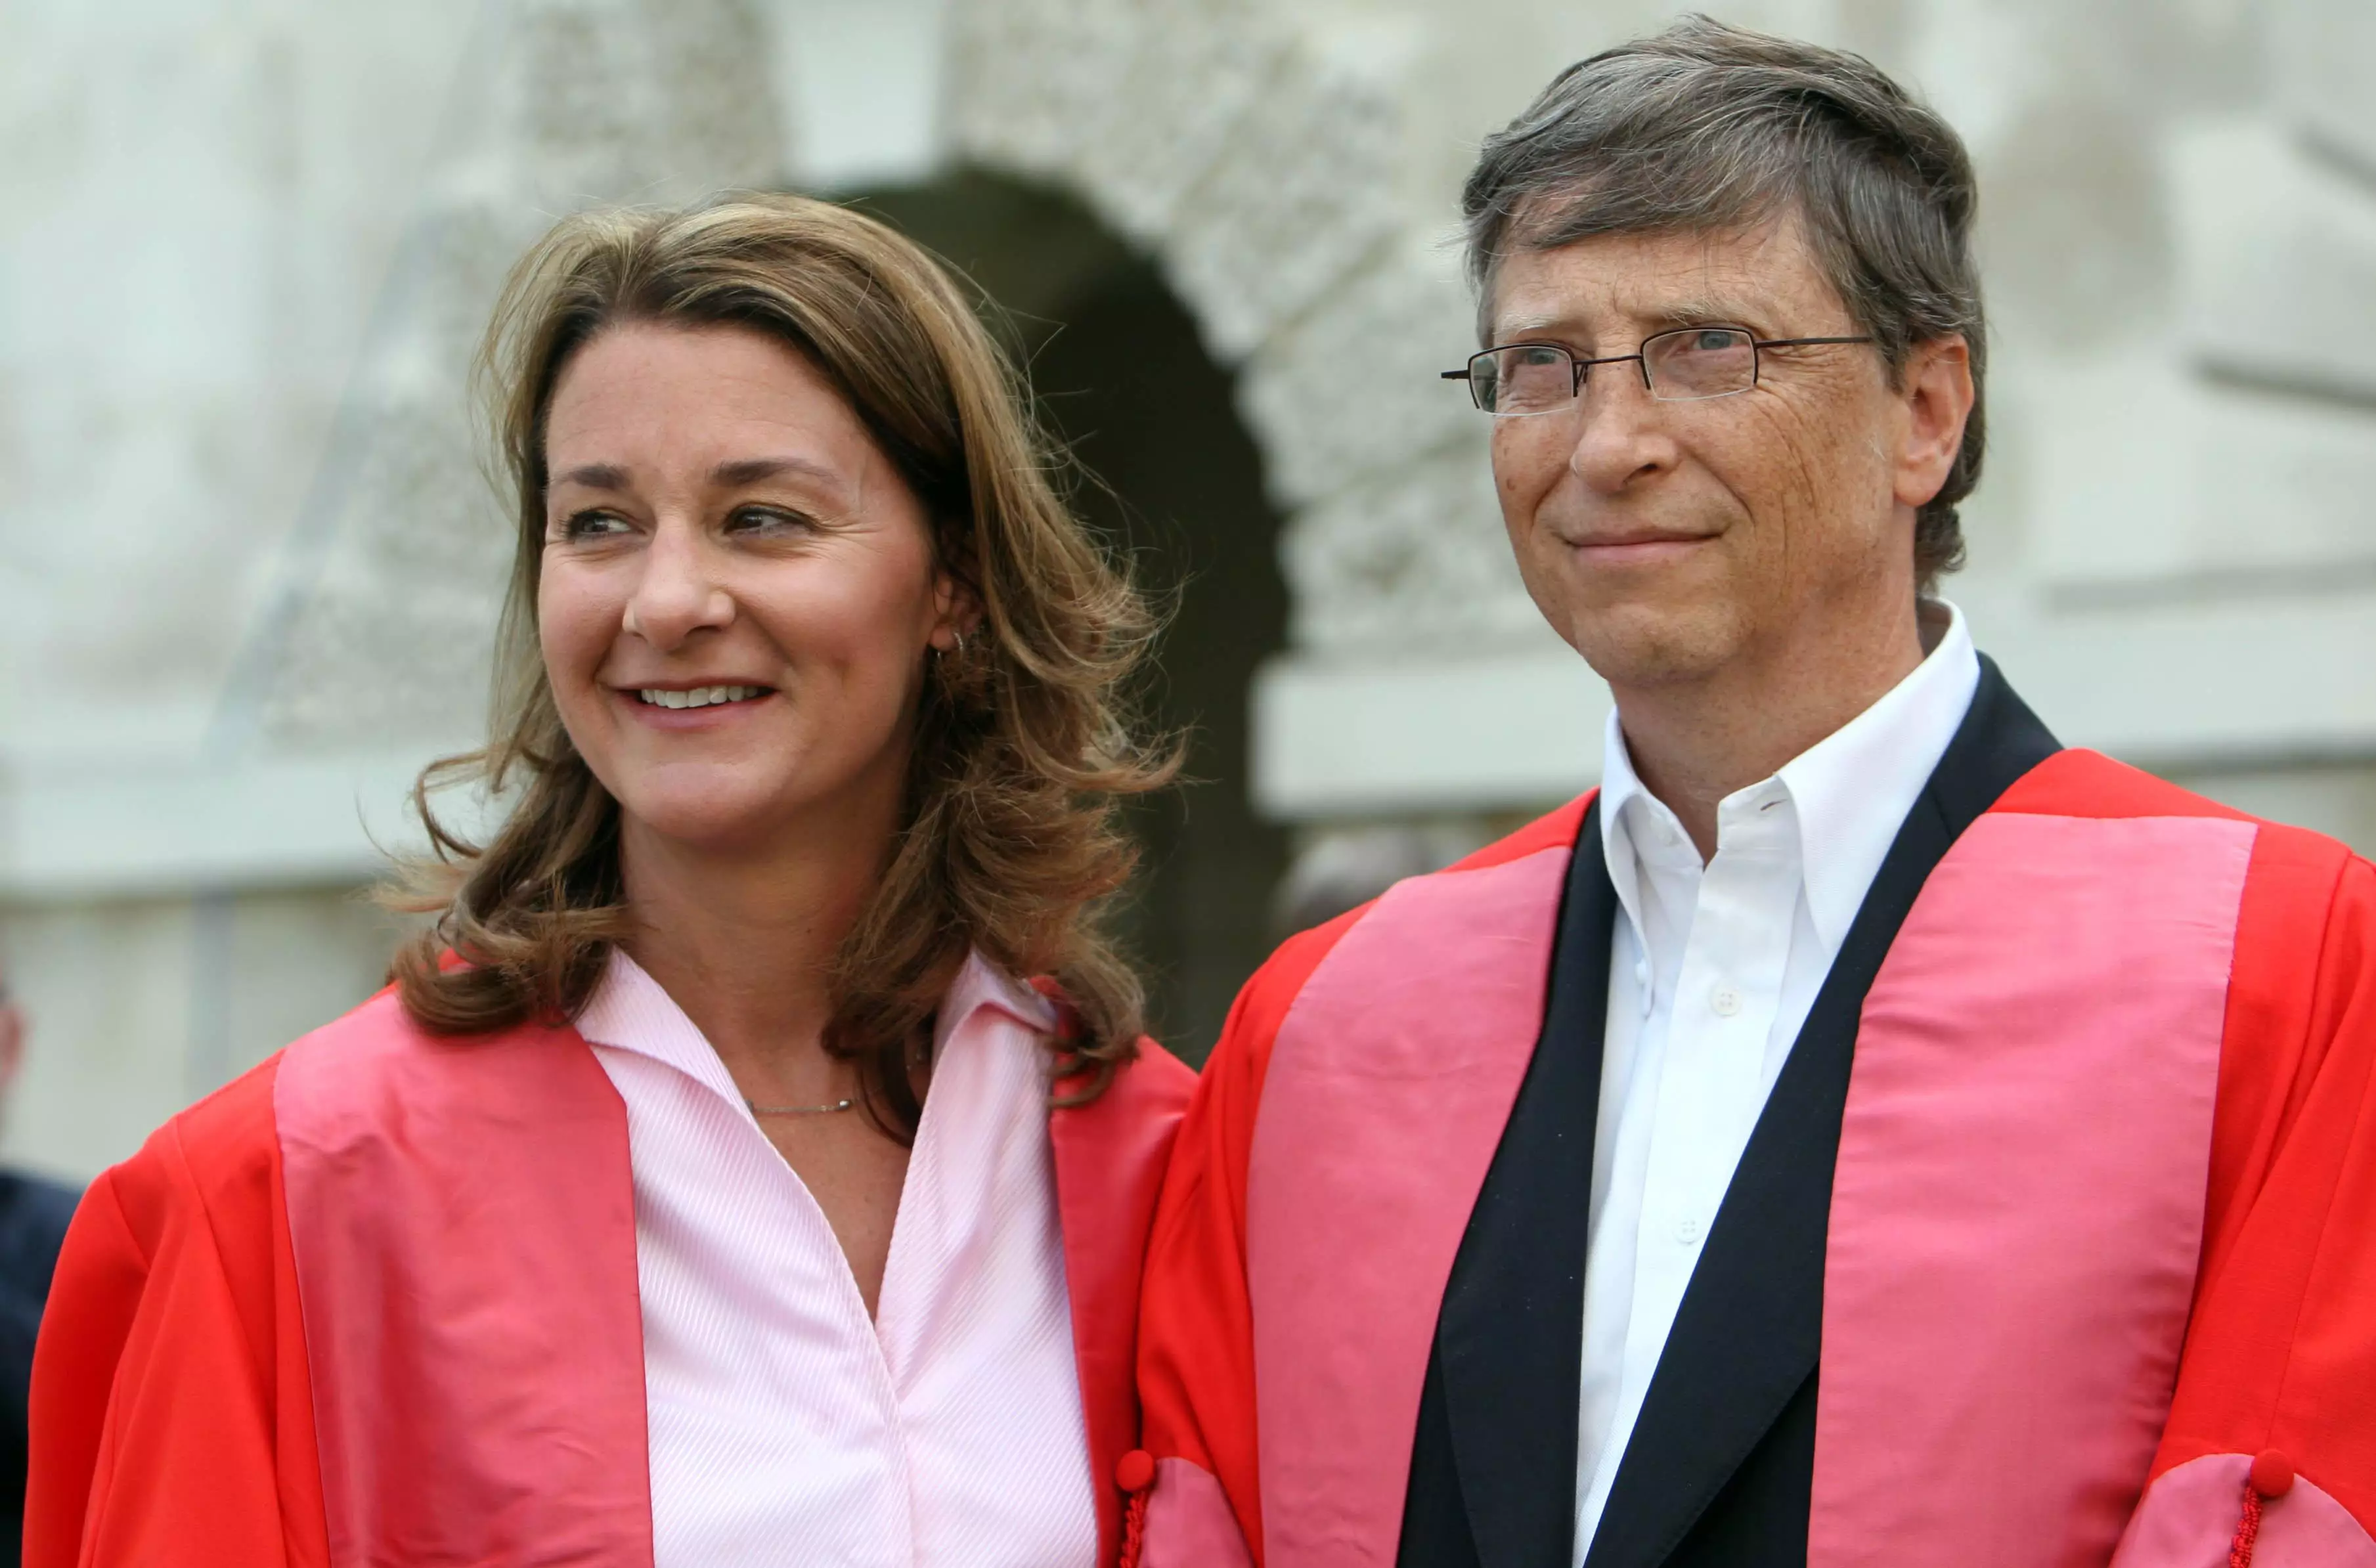 Bill Gates has opened up about the regrets he has over his affair with a Microsoft colleague.